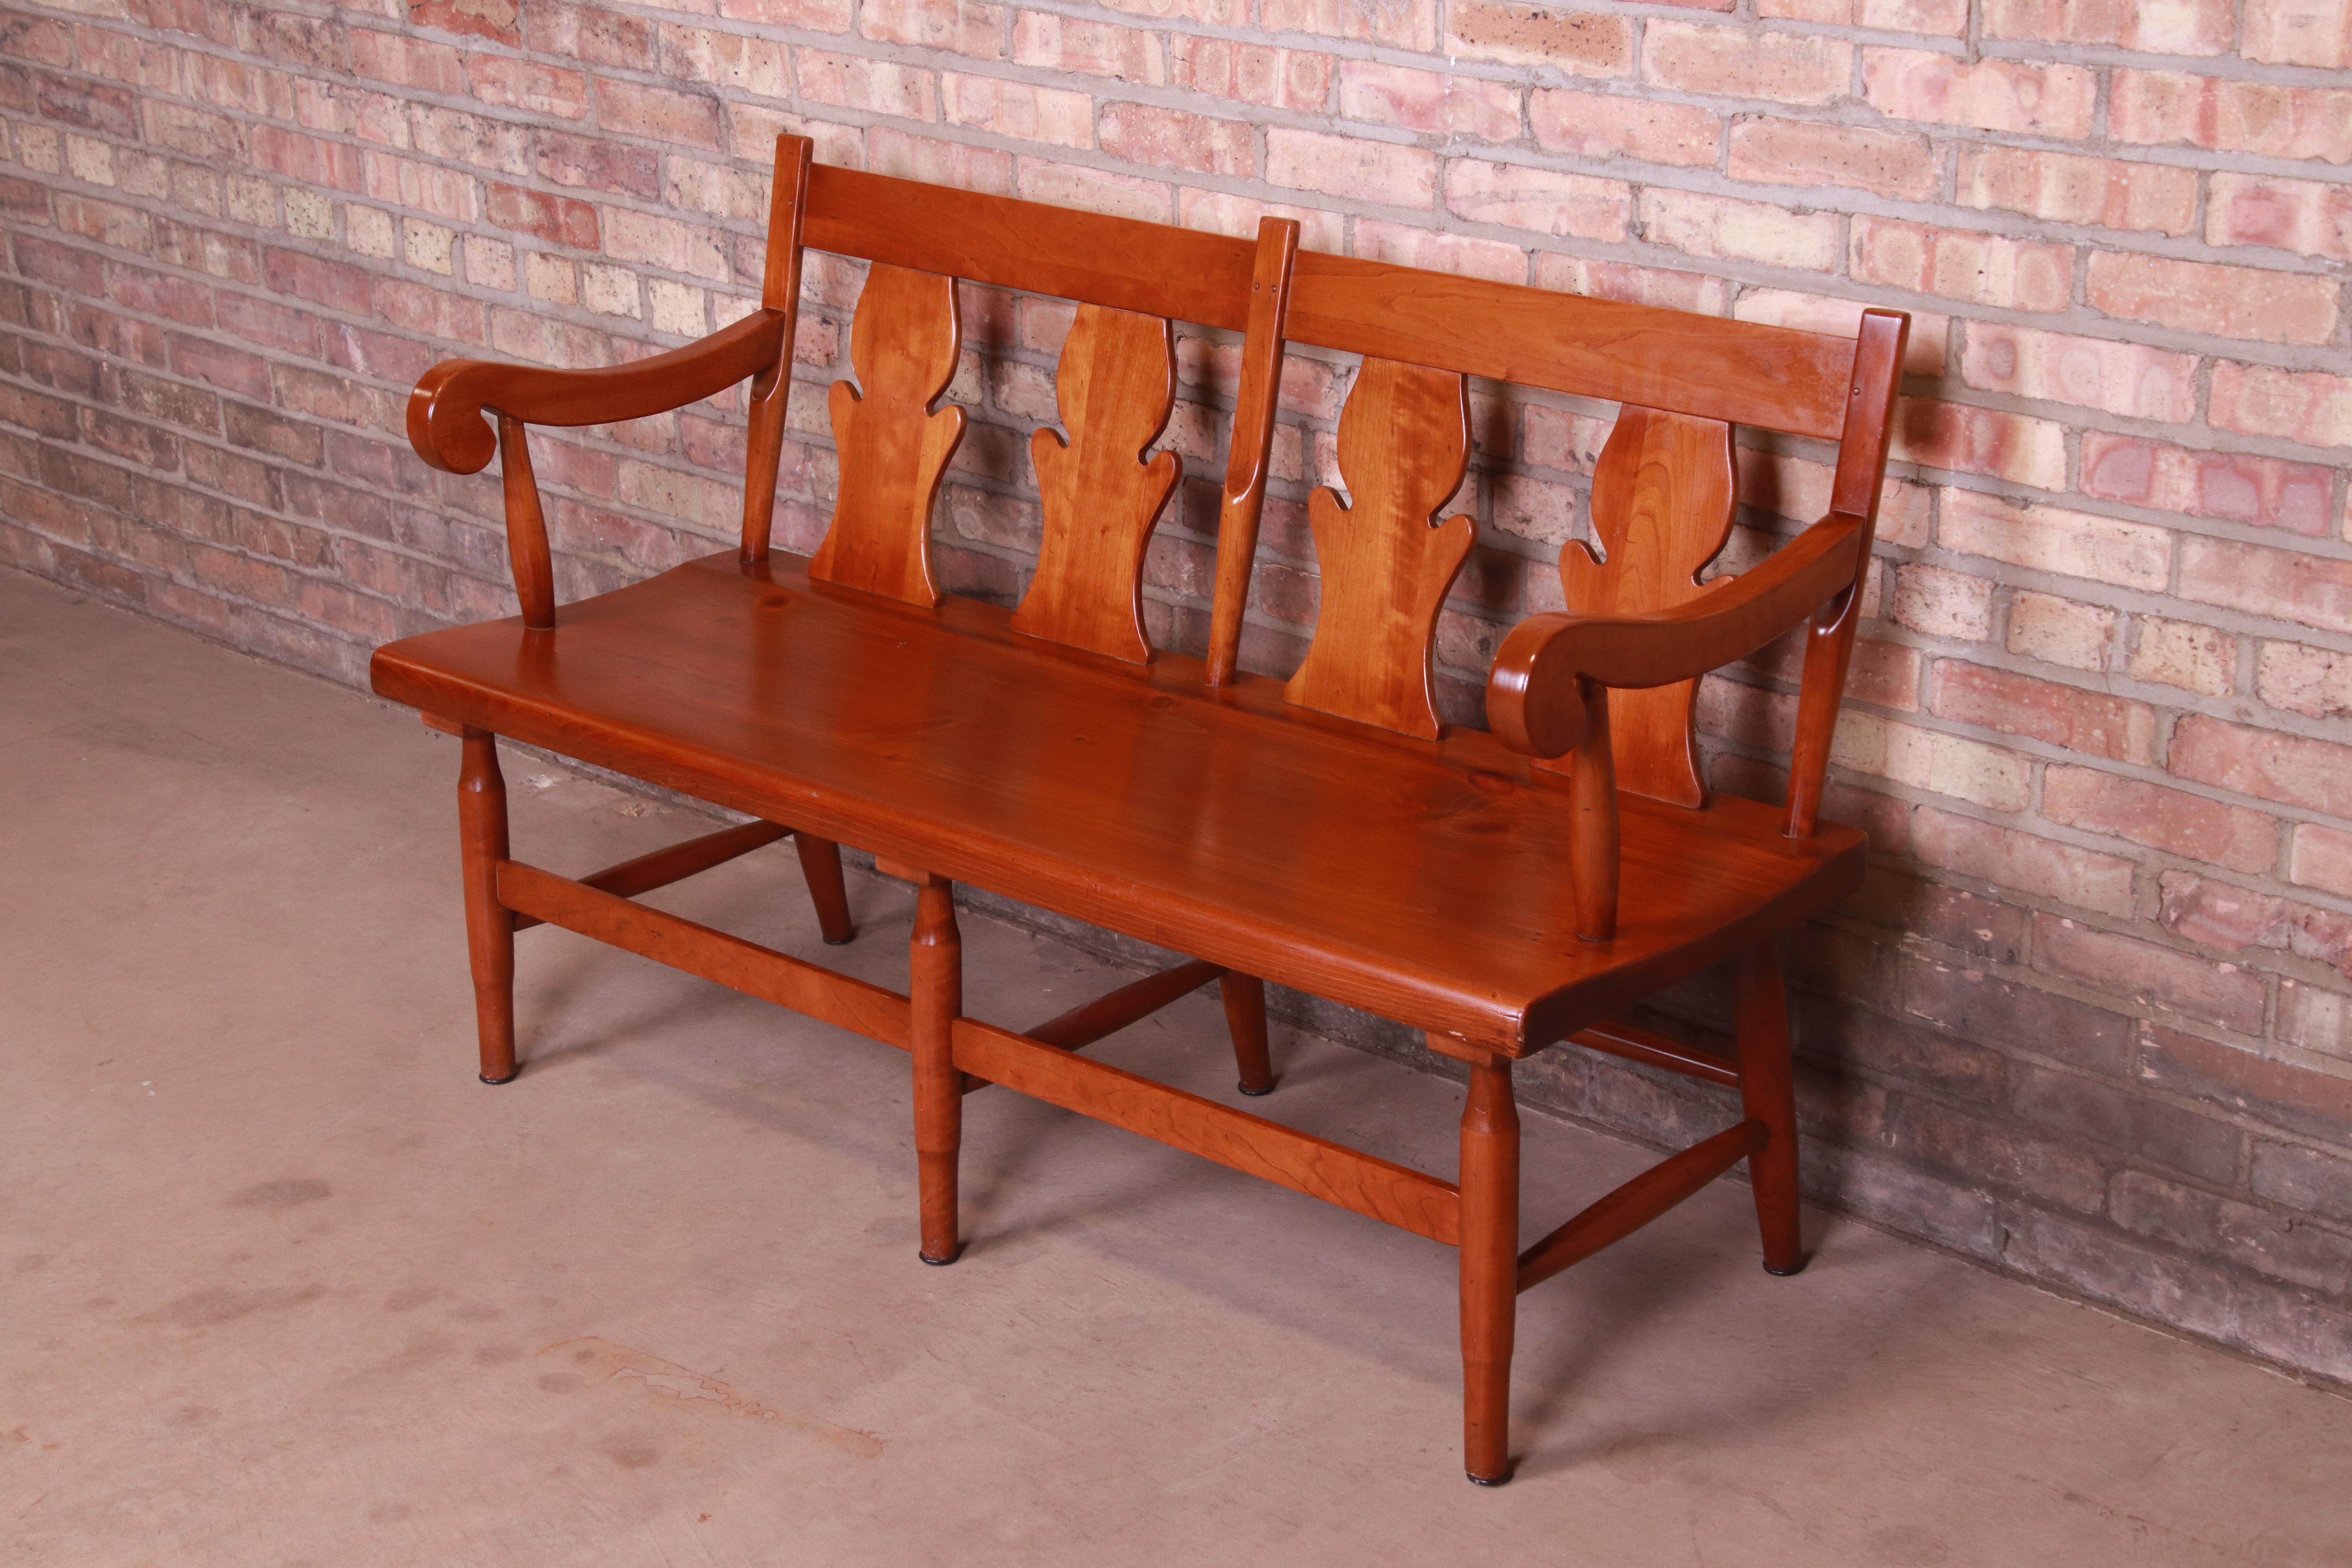 Stickley American Colonial Cherry Wood Fiddle Back Bench or Settee, Circa 1950s 1